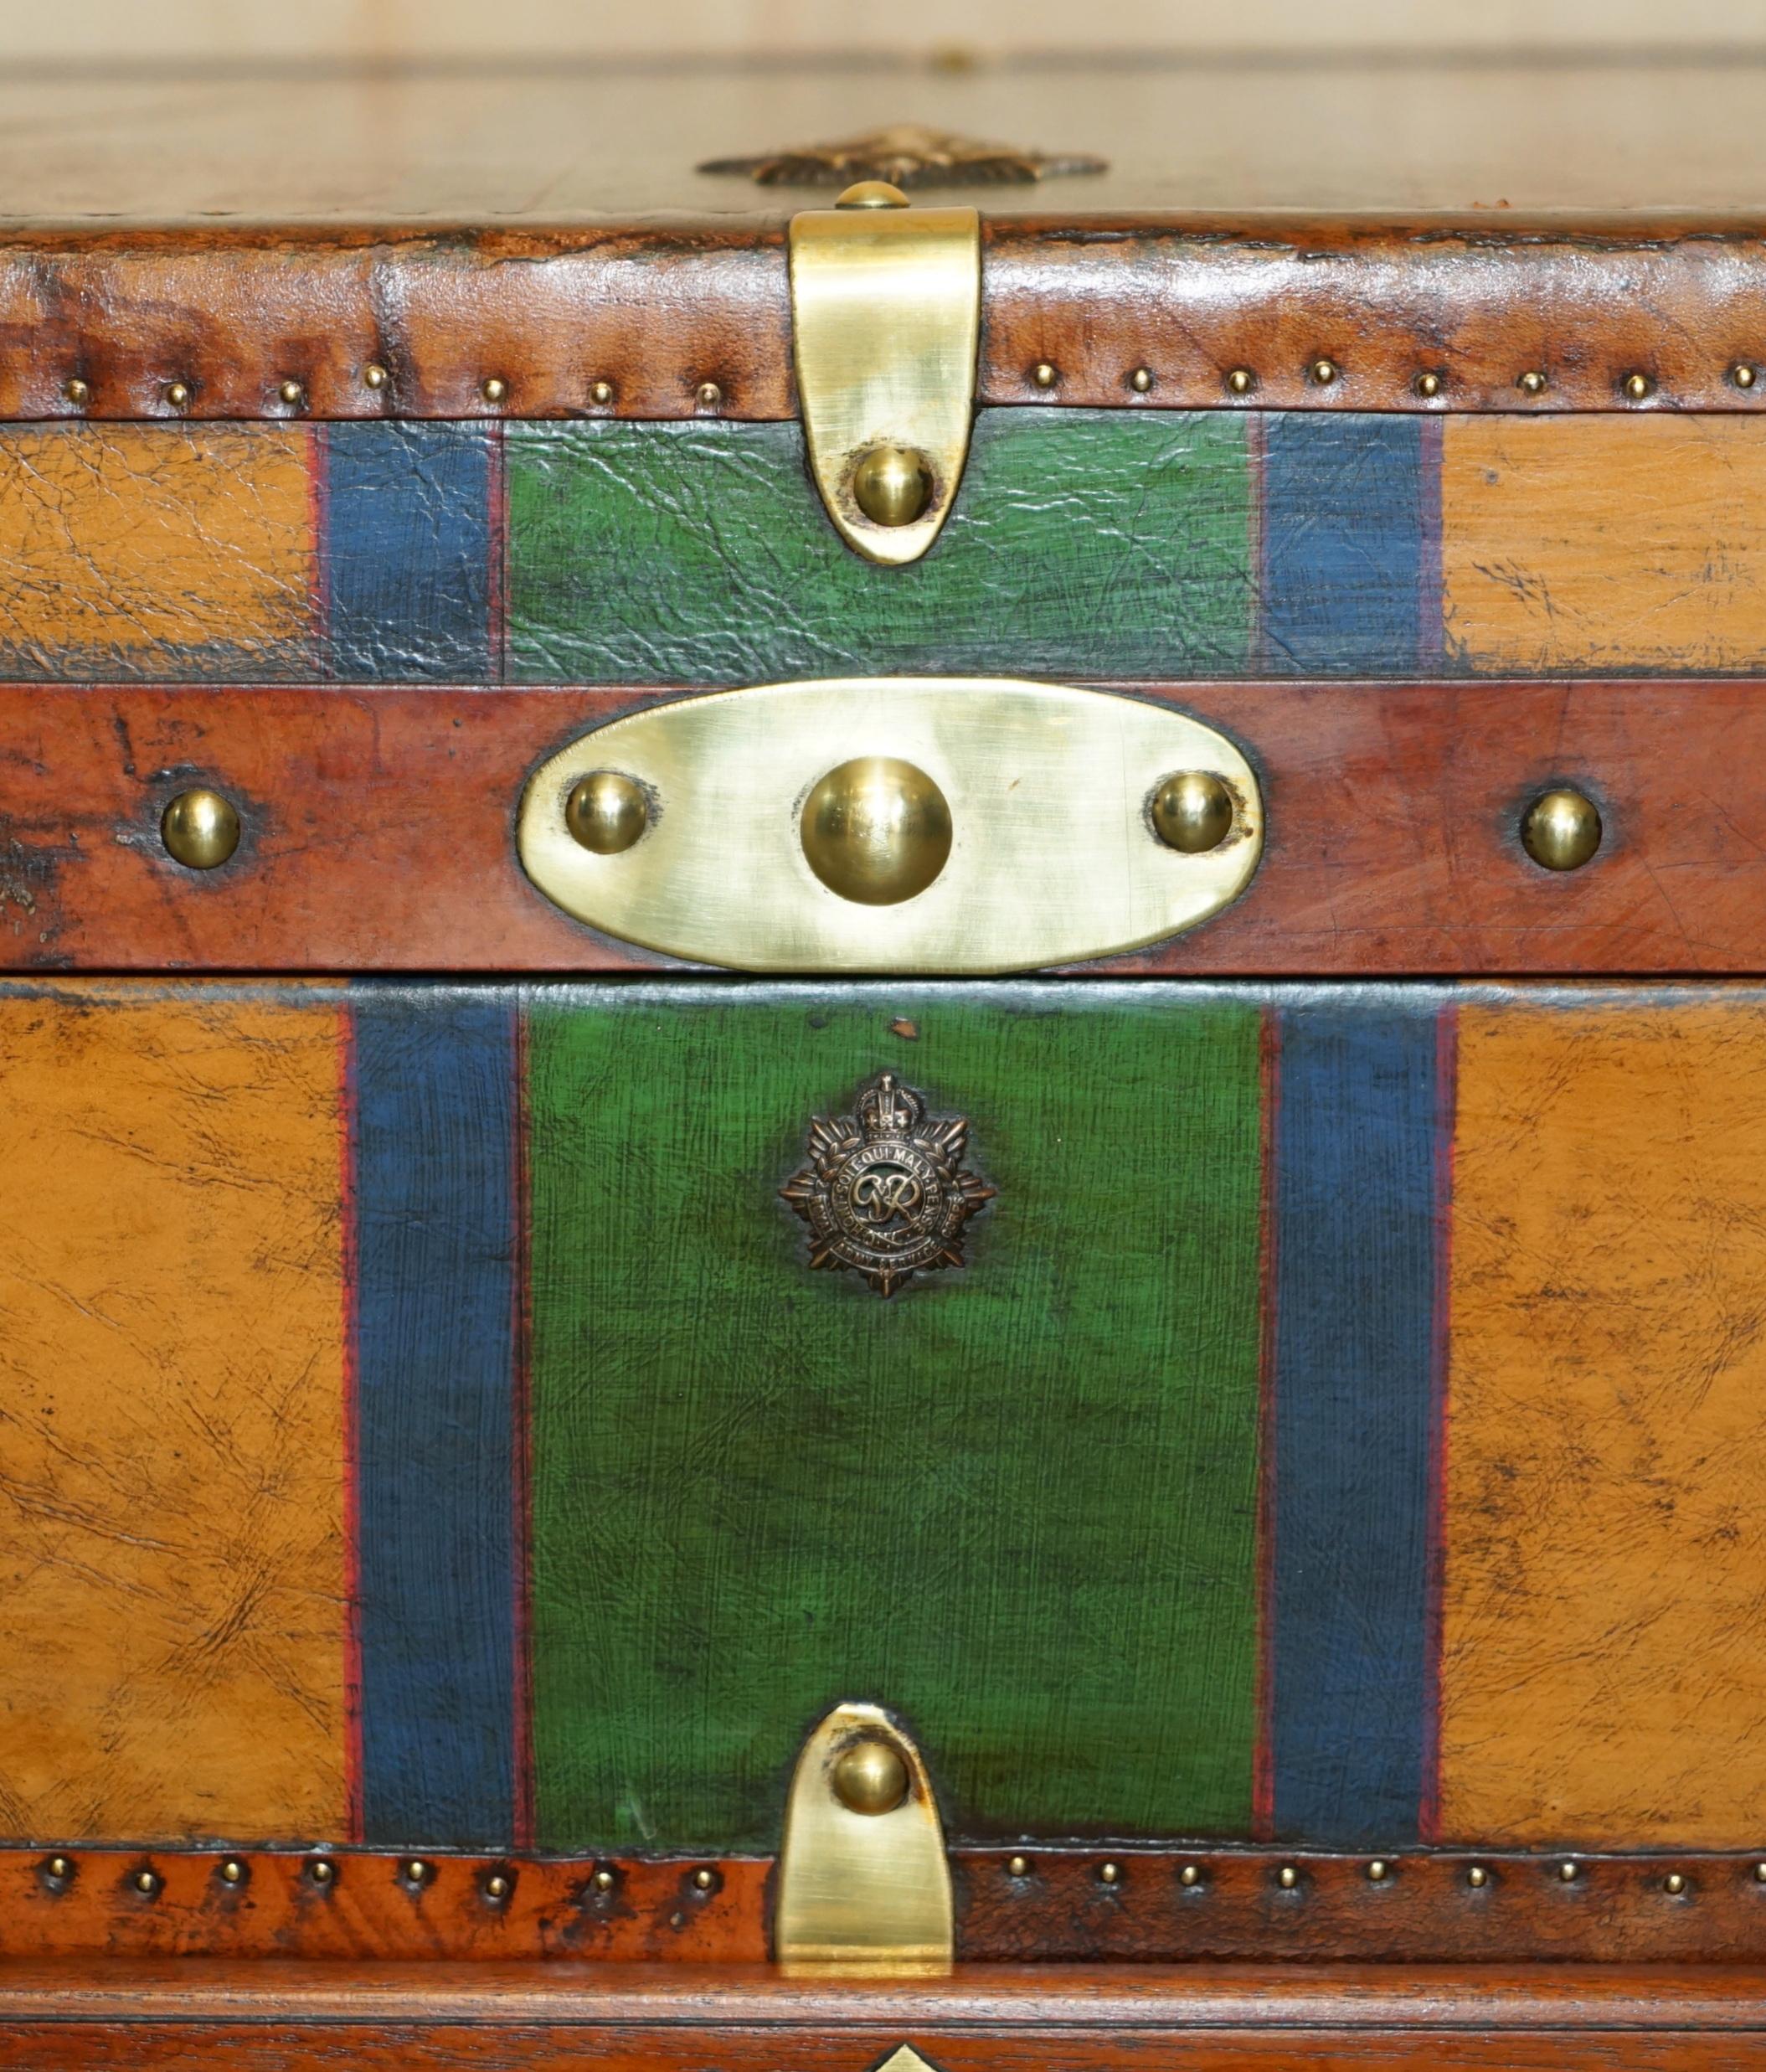 RESTORED BRITISH ARMY BROWN LEATHER TRUNK COFFEE TABLE HONI SOIT QUI MAL Y PENSe For Sale 4